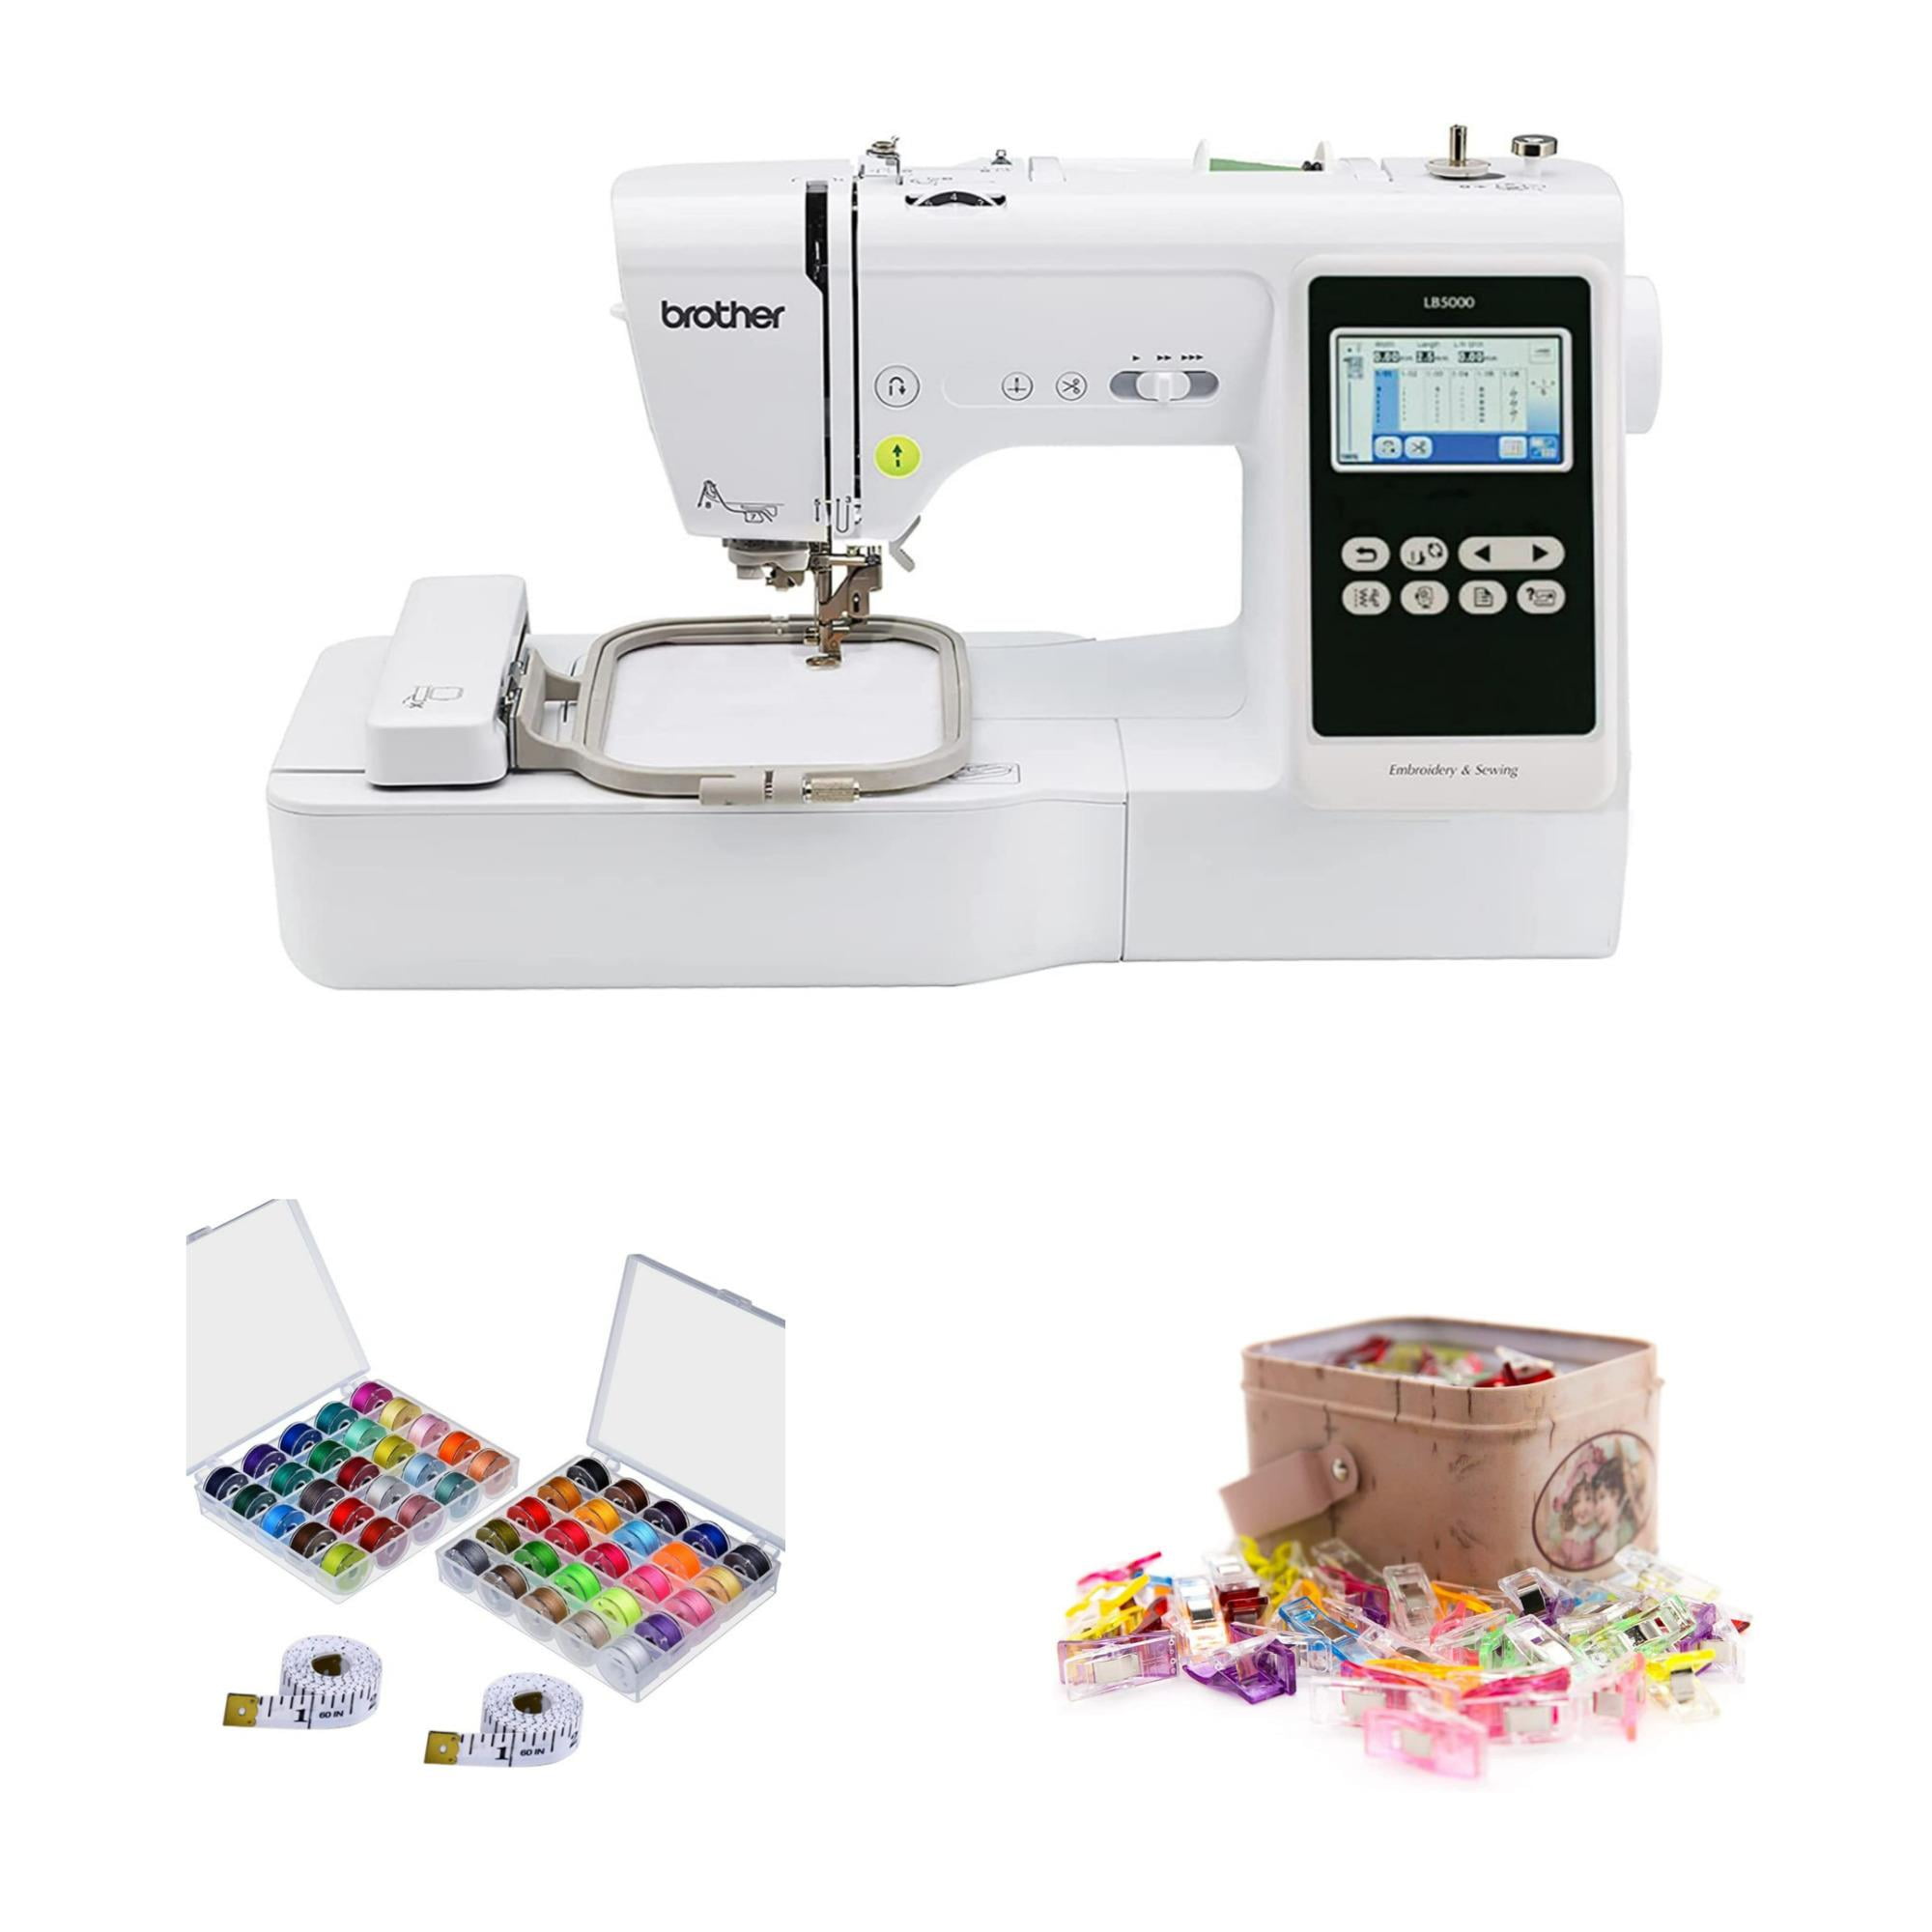 Brother LB5000 Computerized Sewing and Embroidery Machine with Sewing Bundle